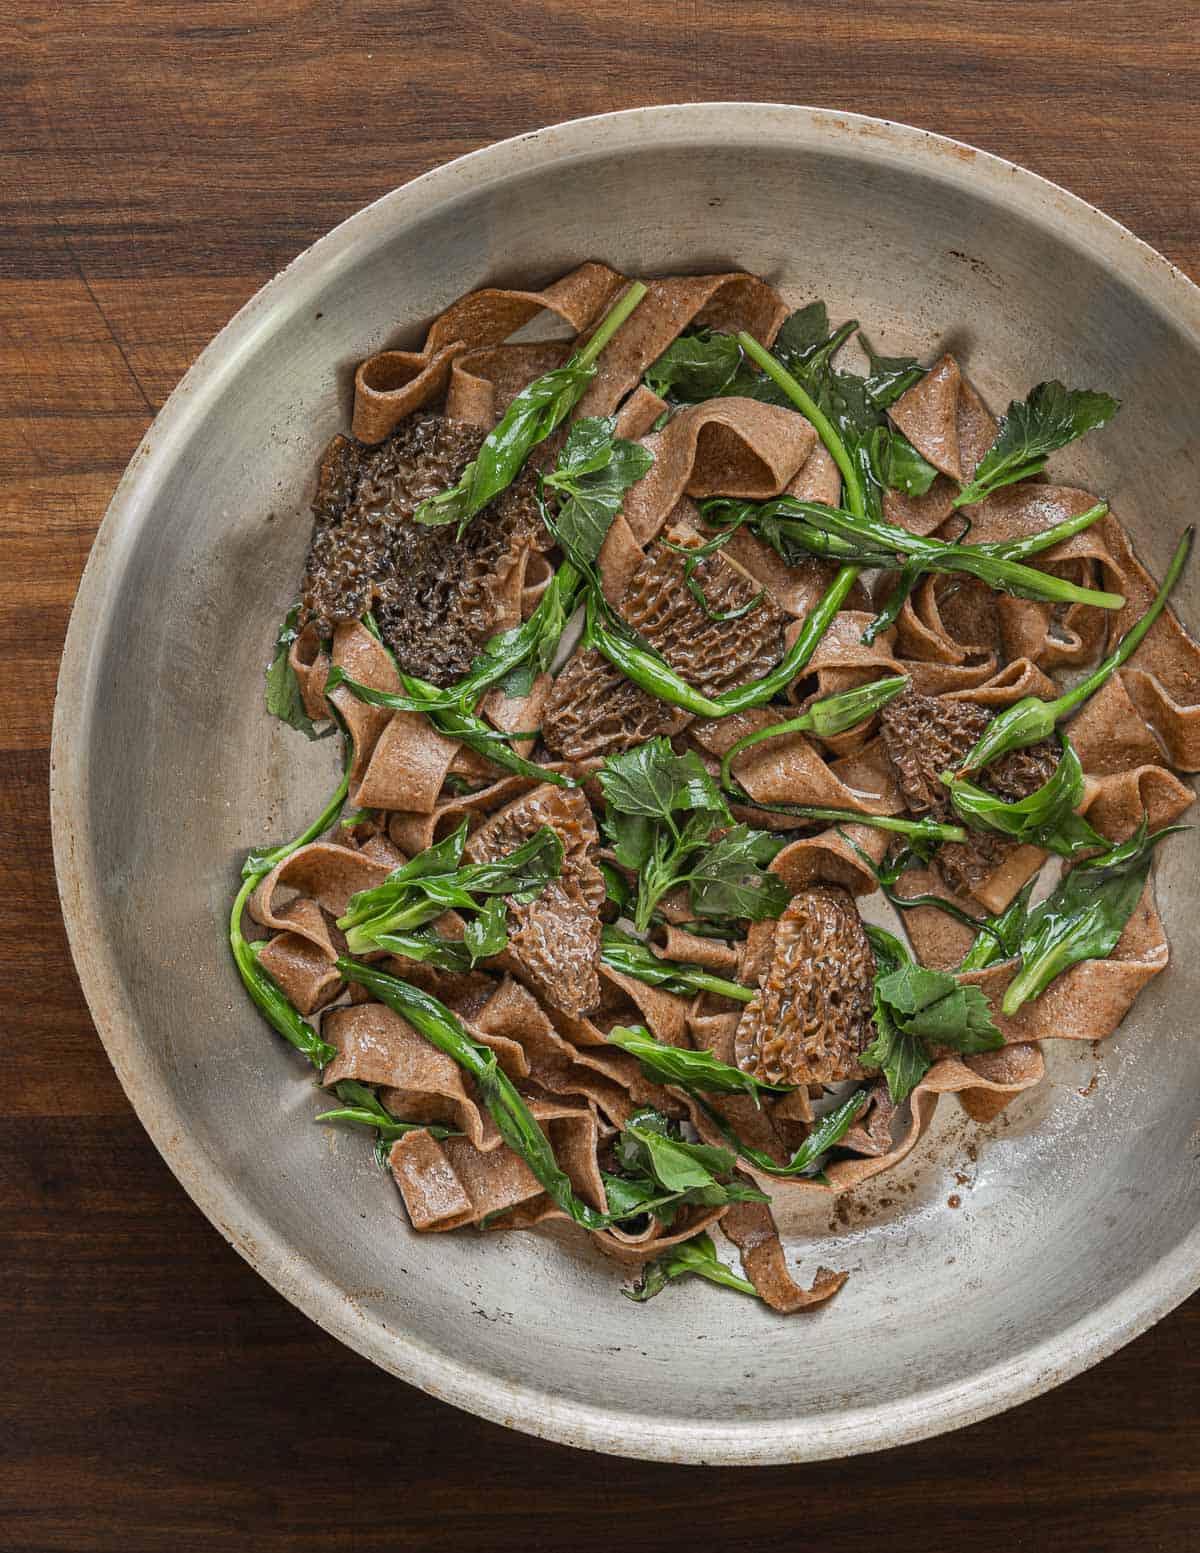 Dock seed pasta with morels, salsify tips, and lambs quarters. 